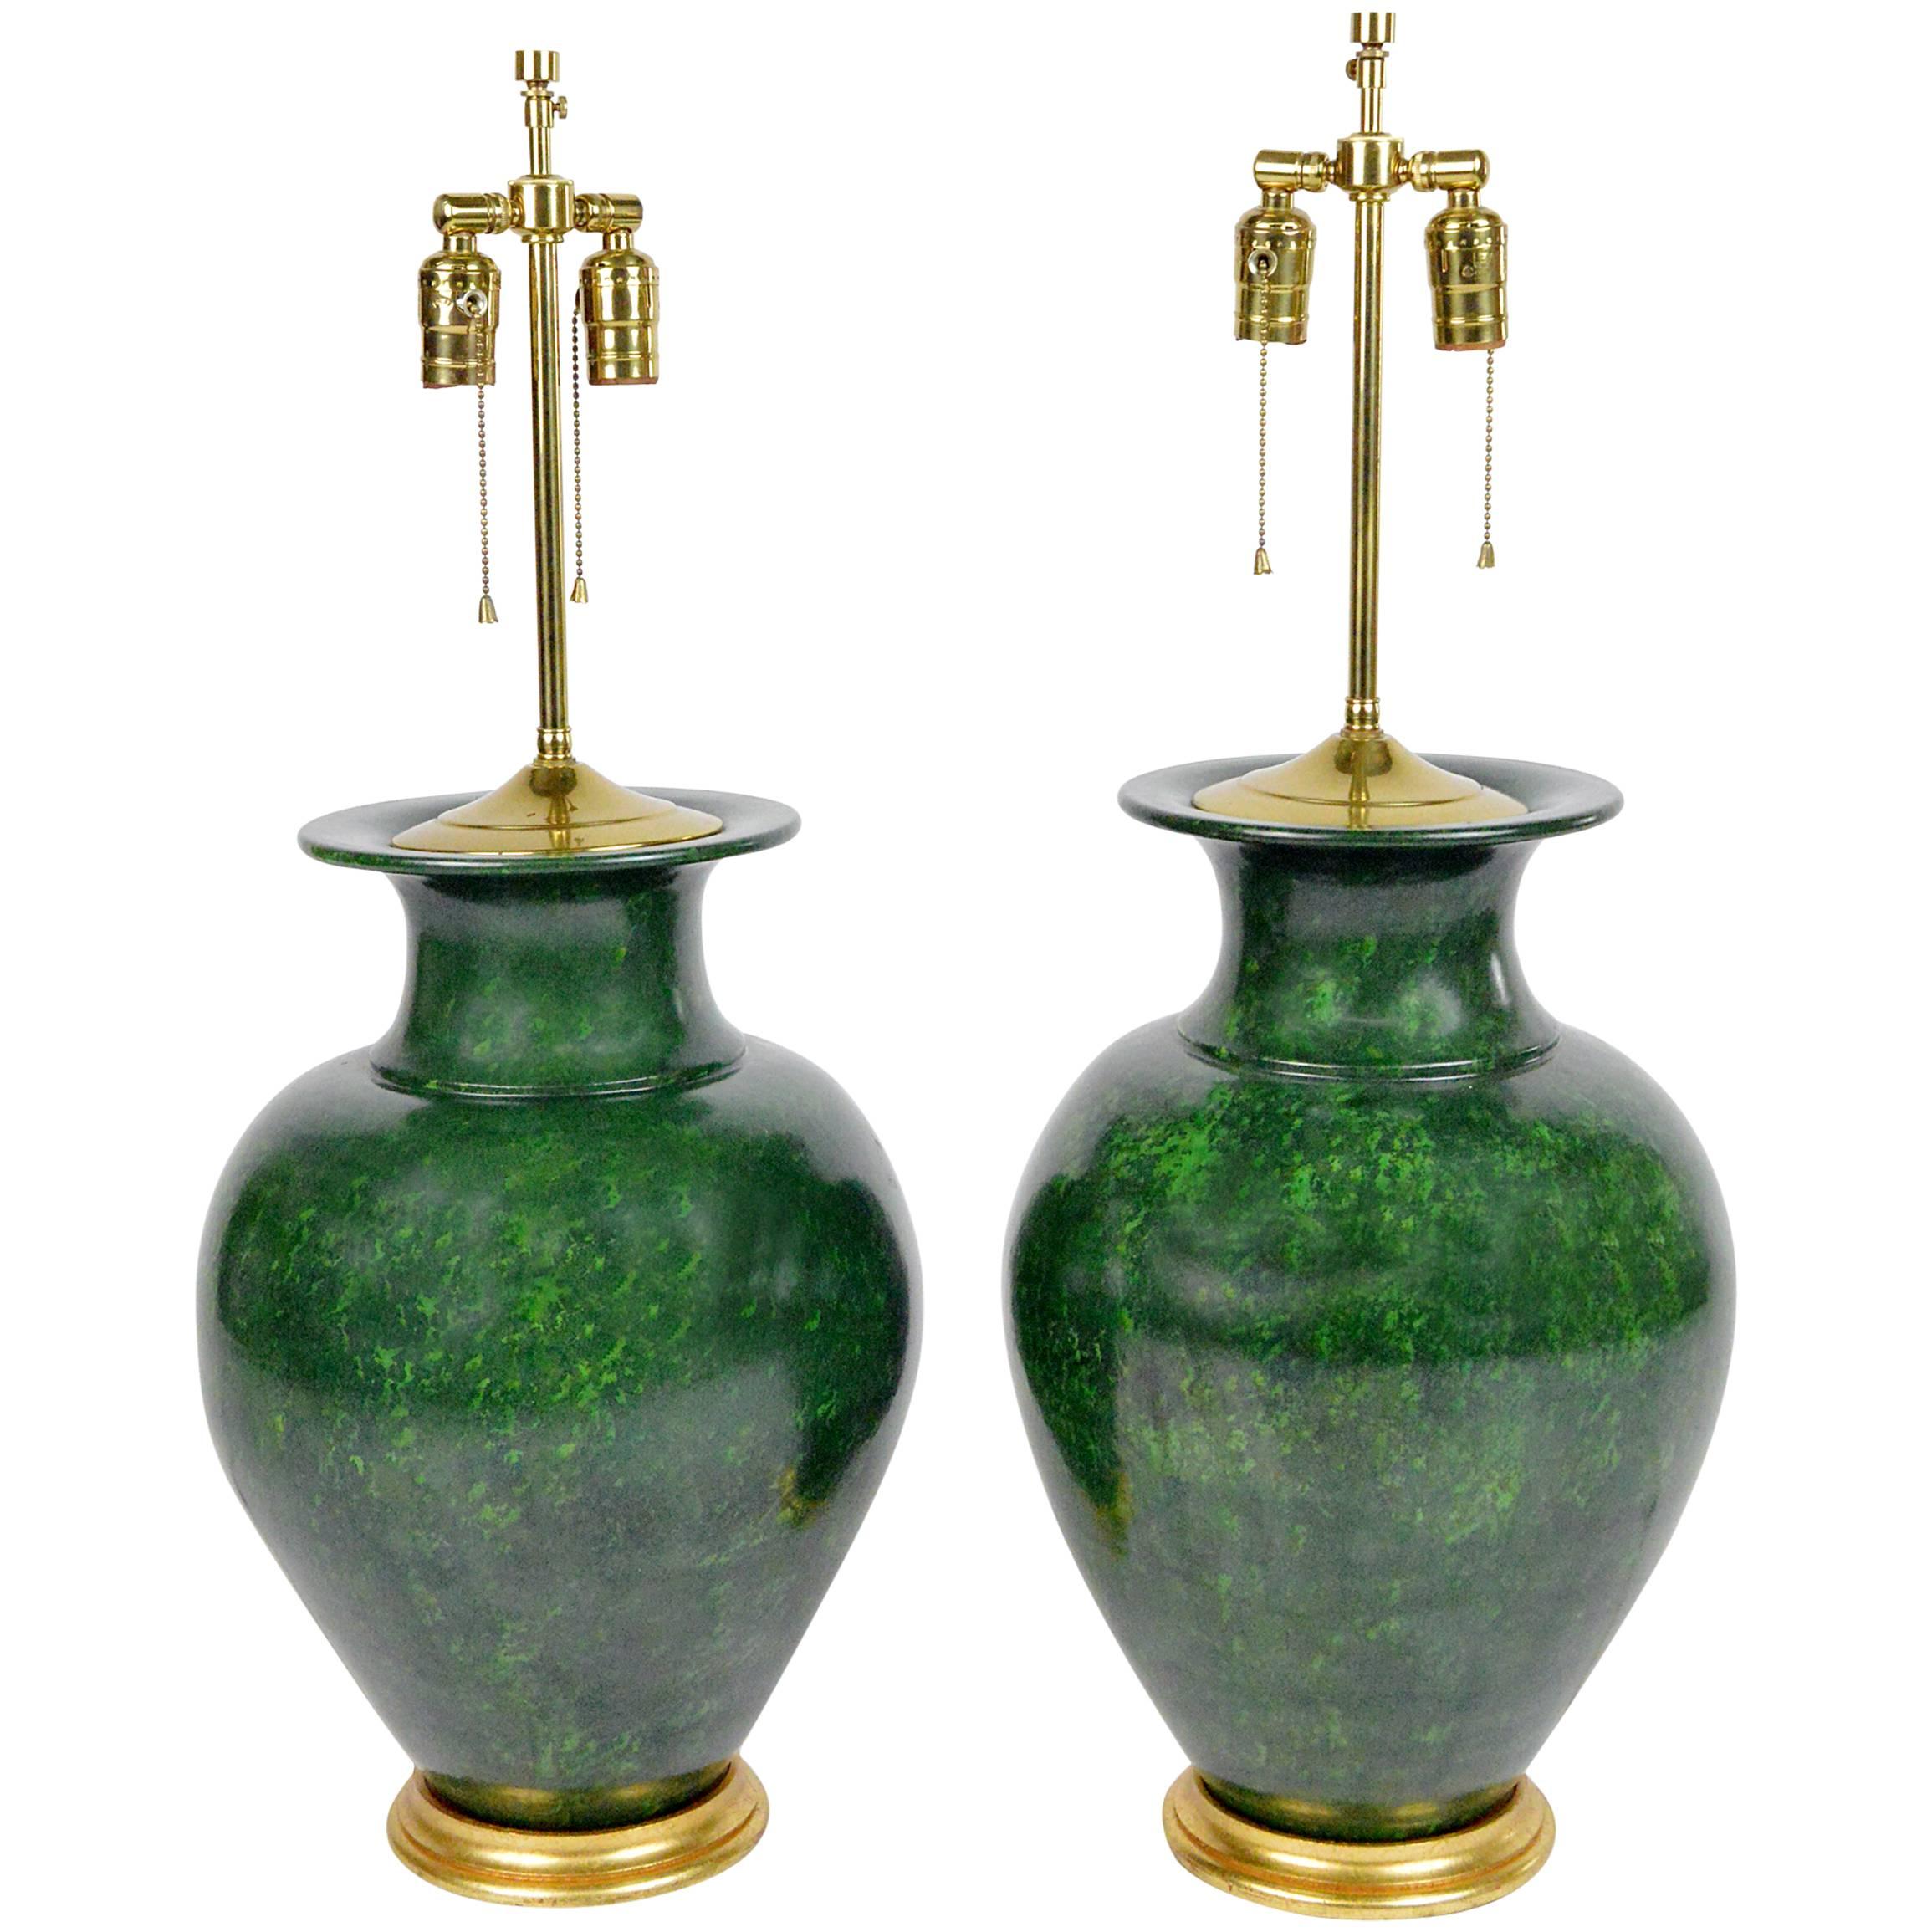 Pair of Large Green Urn Form Pottery Table Lamps